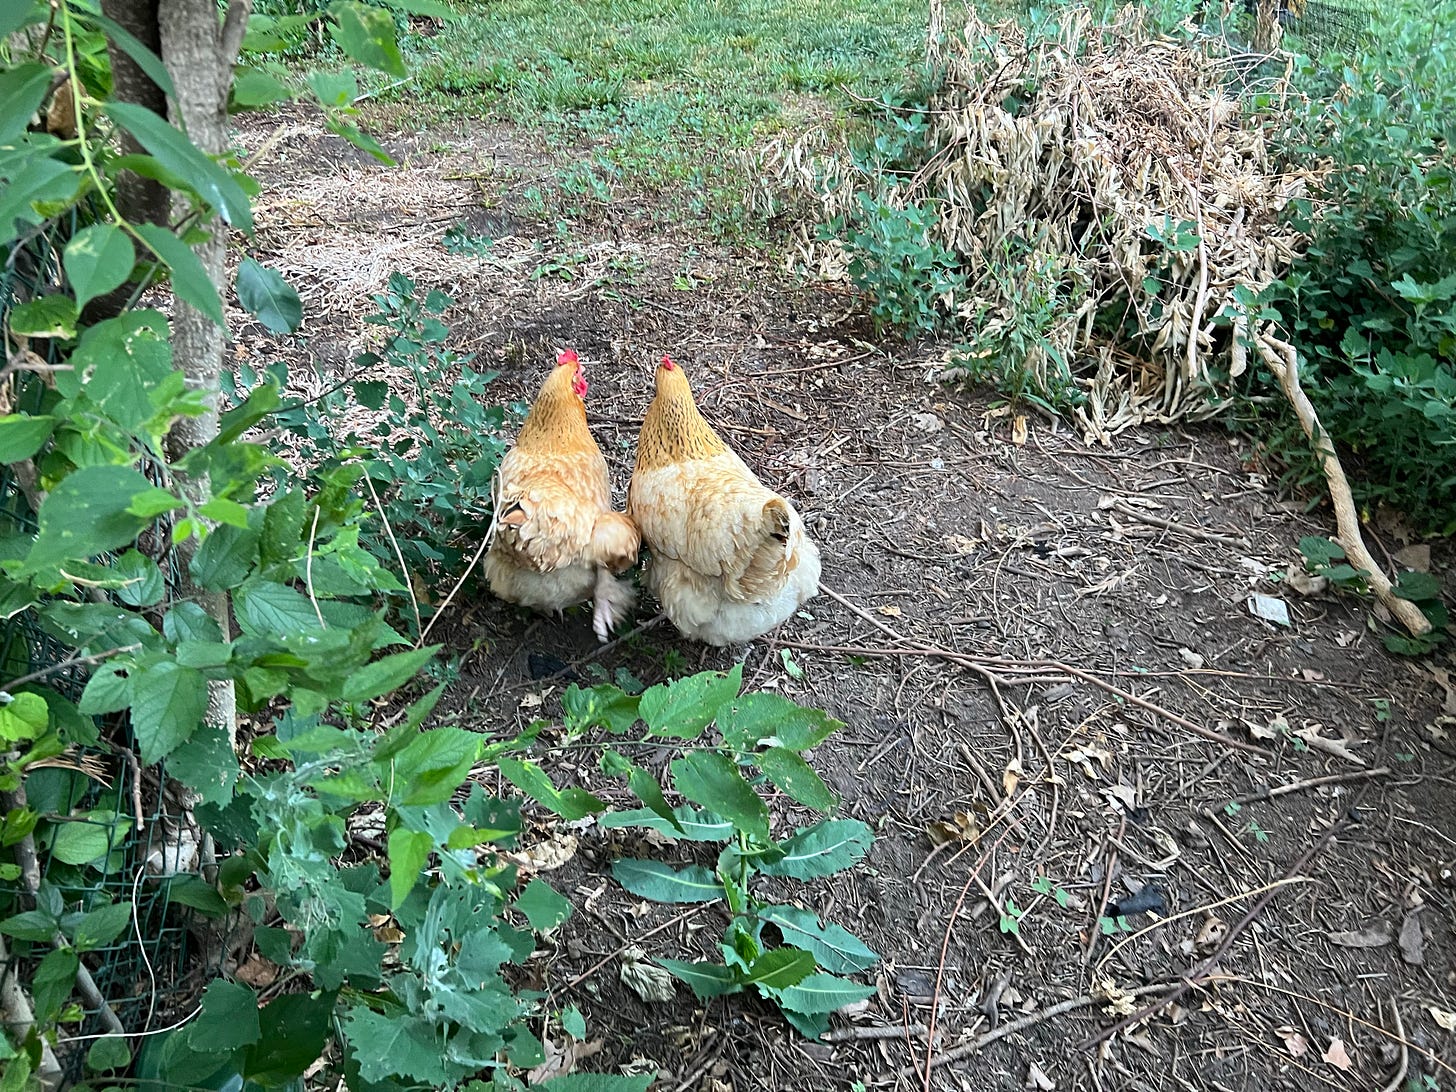 2 buff colored chickens walking together with their tails to the camera